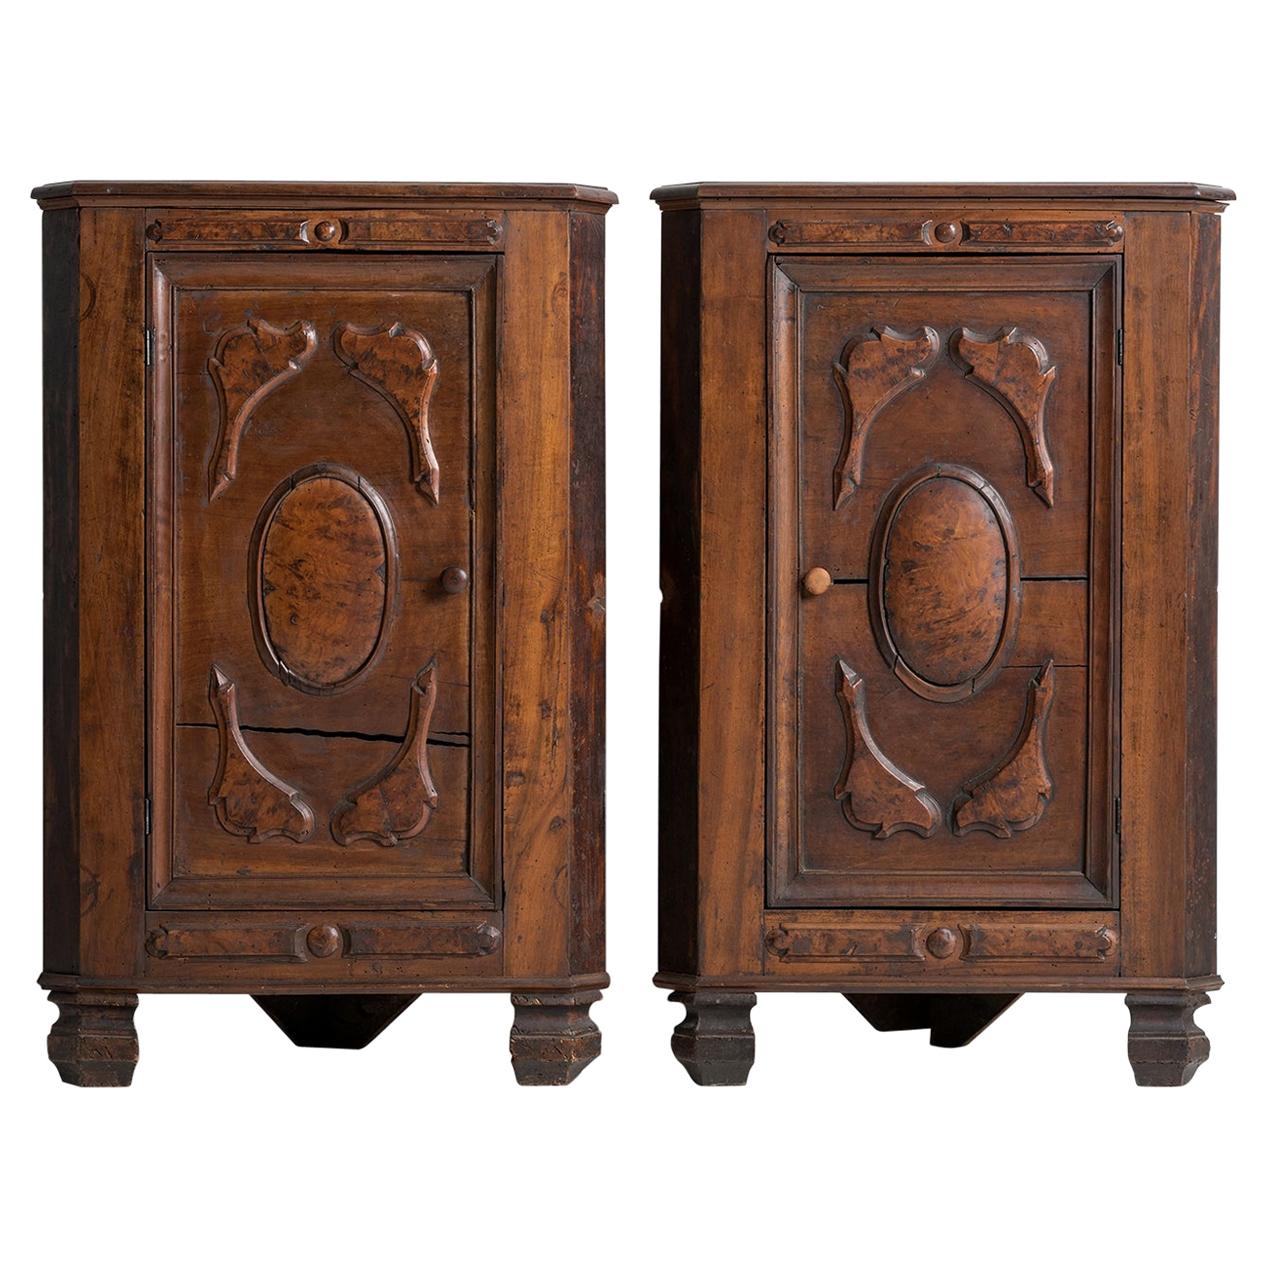 Pair of Fruitwood Corner Cabinets